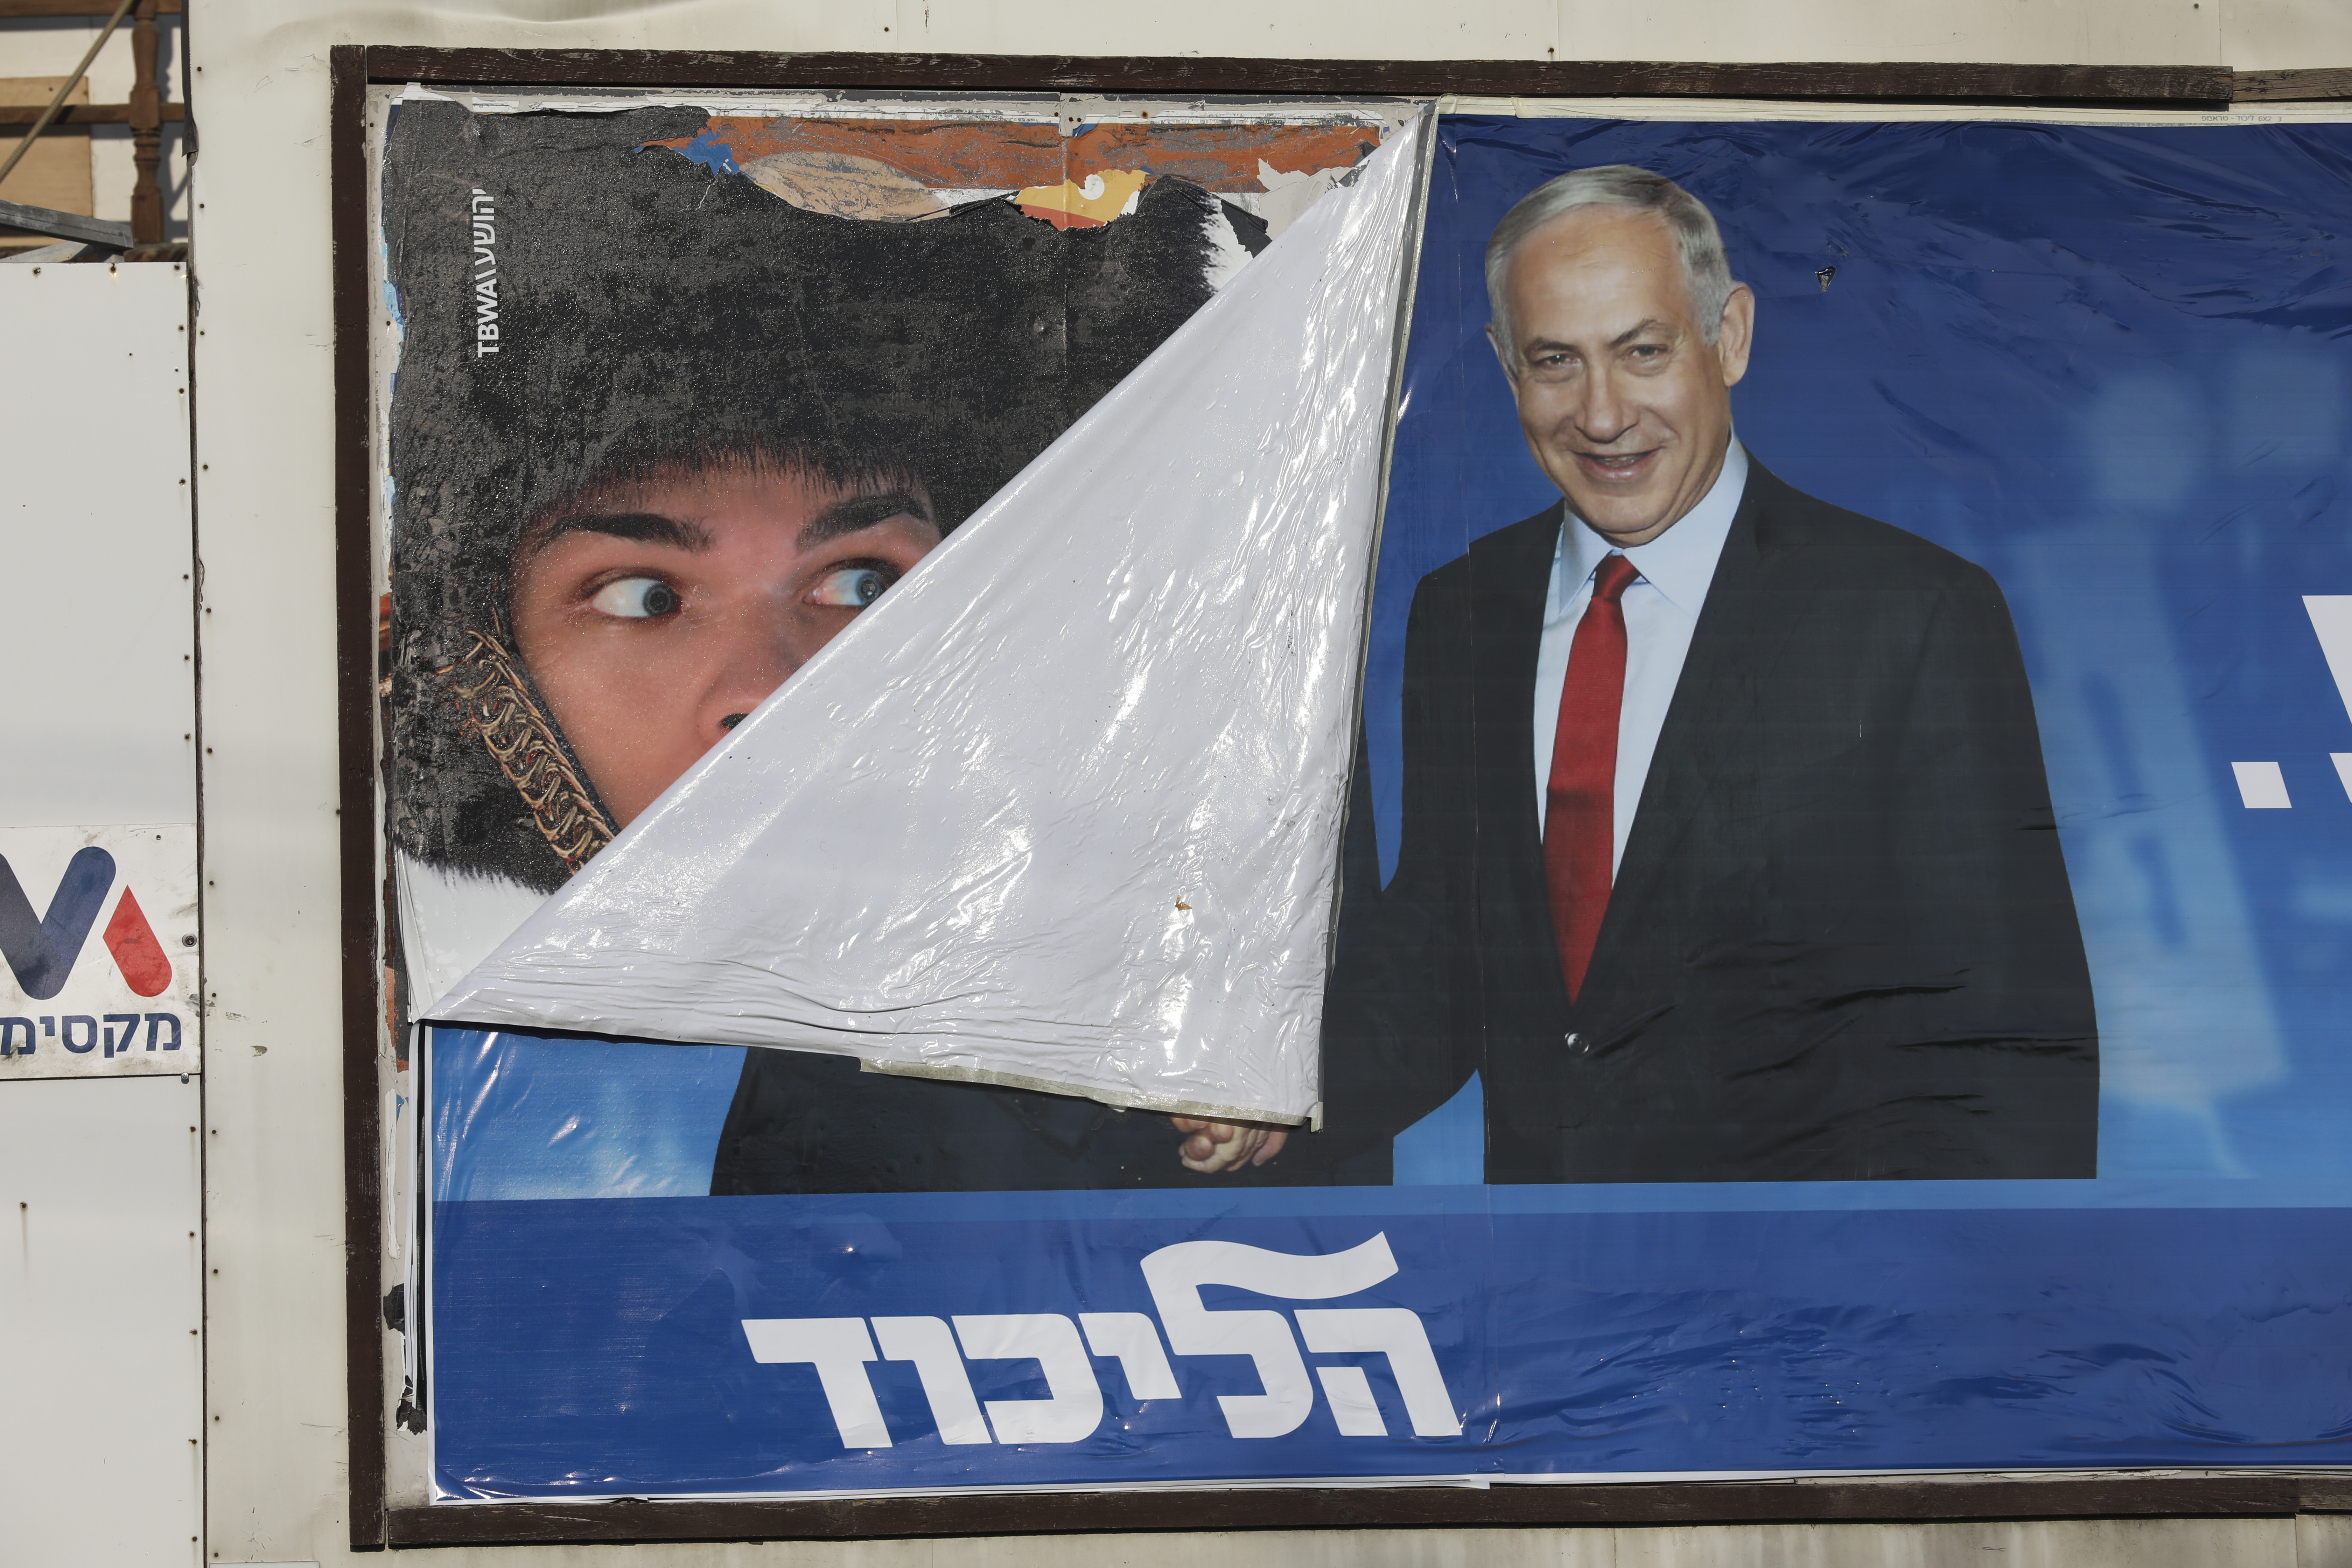 A campaign poster for Israeli Prime Minister Benjamin Netanyahu is seen in Bnei Brak, Israel, Tuesday, Sept. 17, 2019. Israelis began voting Tuesday in an unprecedented repeat election that will decide whether longtime Prime Minister Benjamin Netanyahu stays in power despite a looming indictment on corruption charges. .(AP Photo/Oded Balilty)